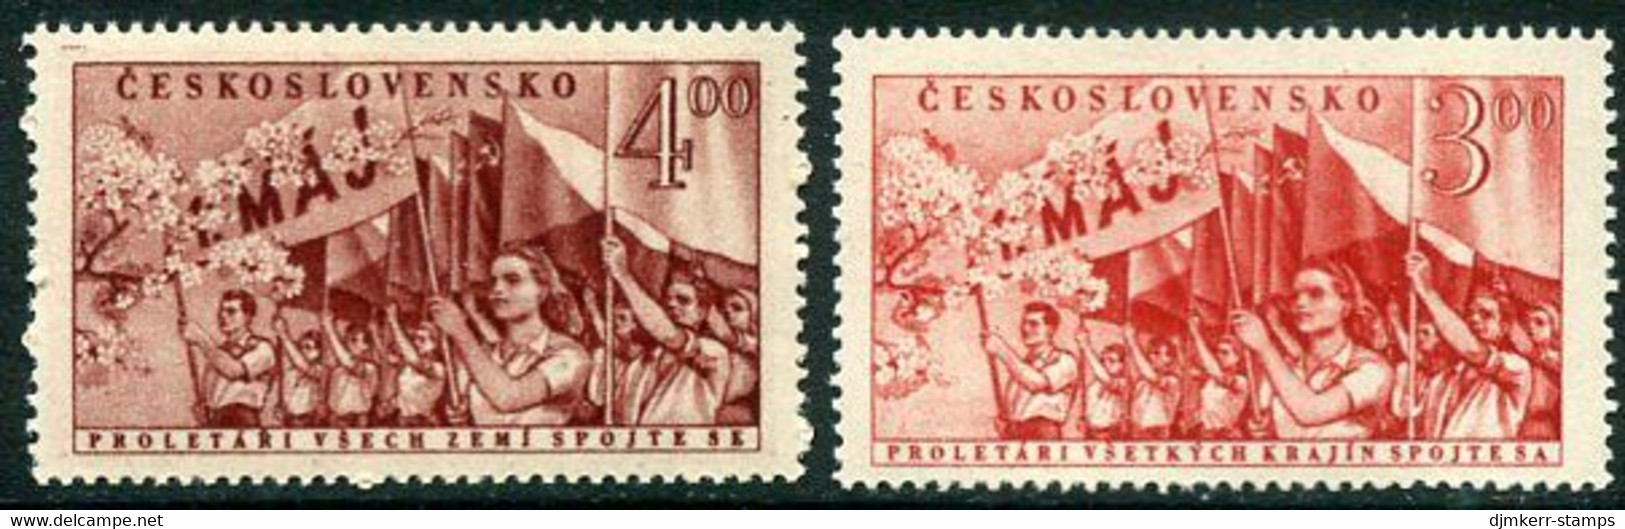 CZECHOSLOVAKIA 1952 Labour Day MNH / **.  Michel 727-28 - Unused Stamps